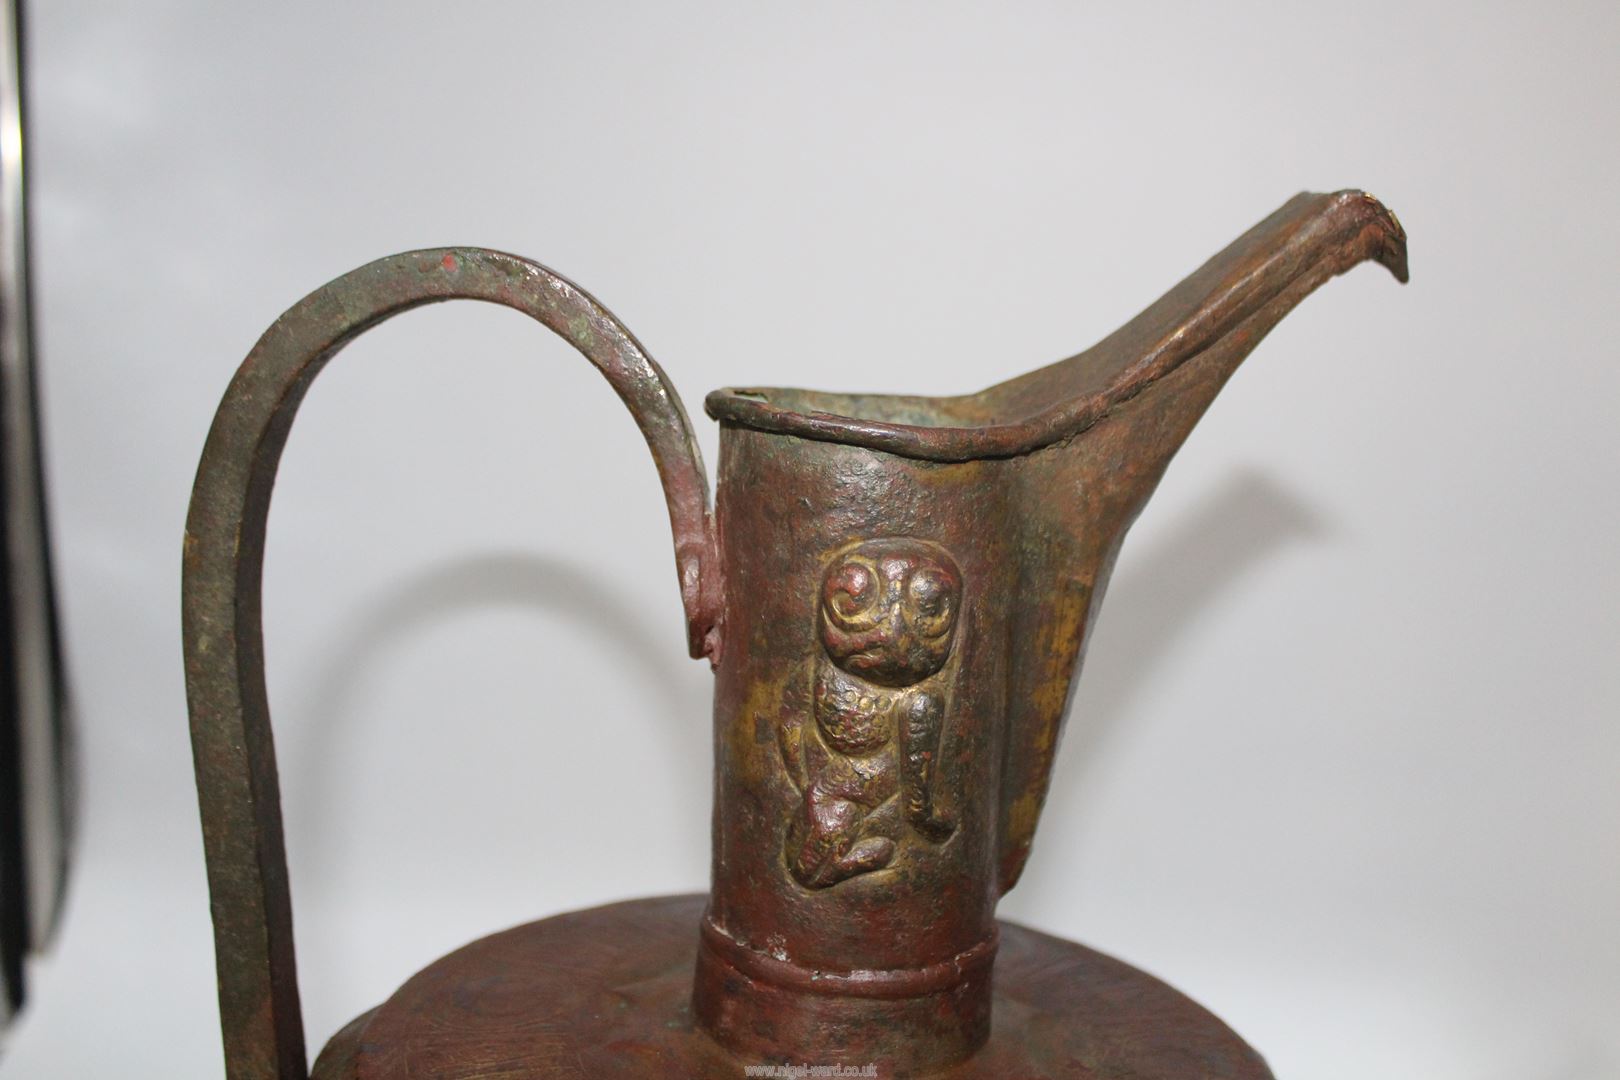 A Khorassan bronze ewer, 12th - 13th c. - Image 2 of 7